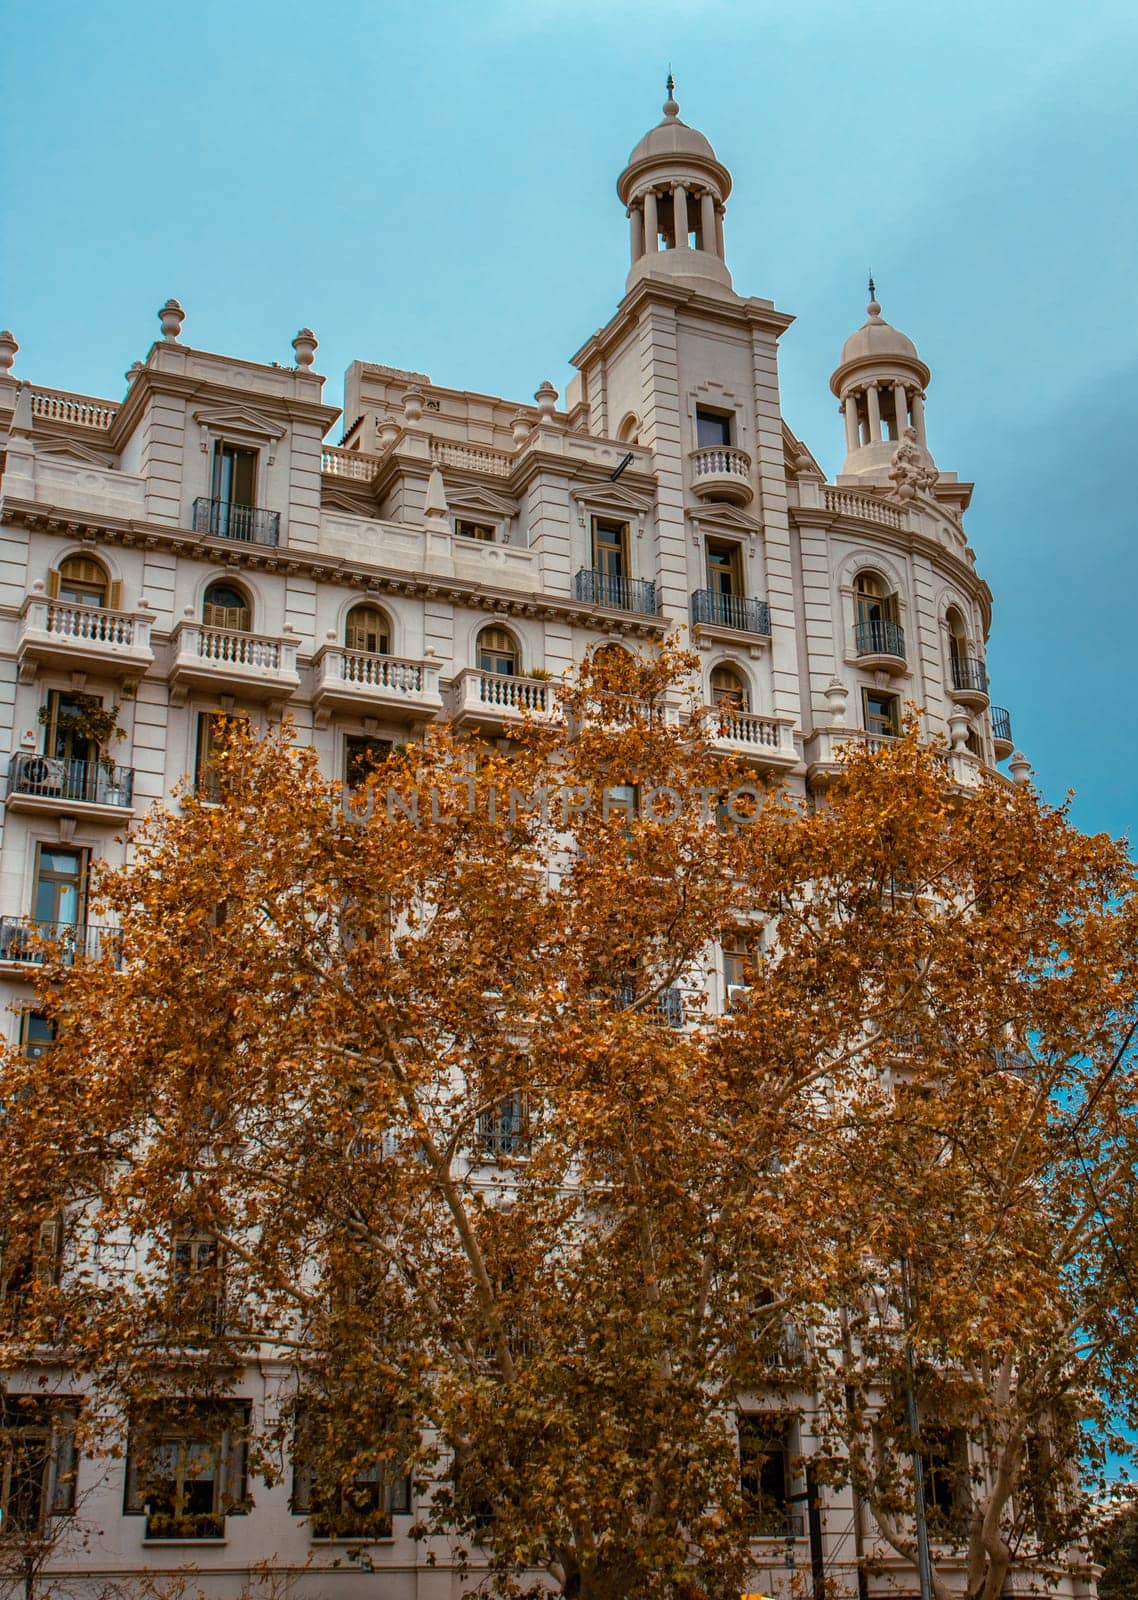 Historical apartment building in Europe city photo. Autumnal Barcelona, Catalonia. Beautiful urban scenery photography. Street scene. High quality picture for wallpaper, article